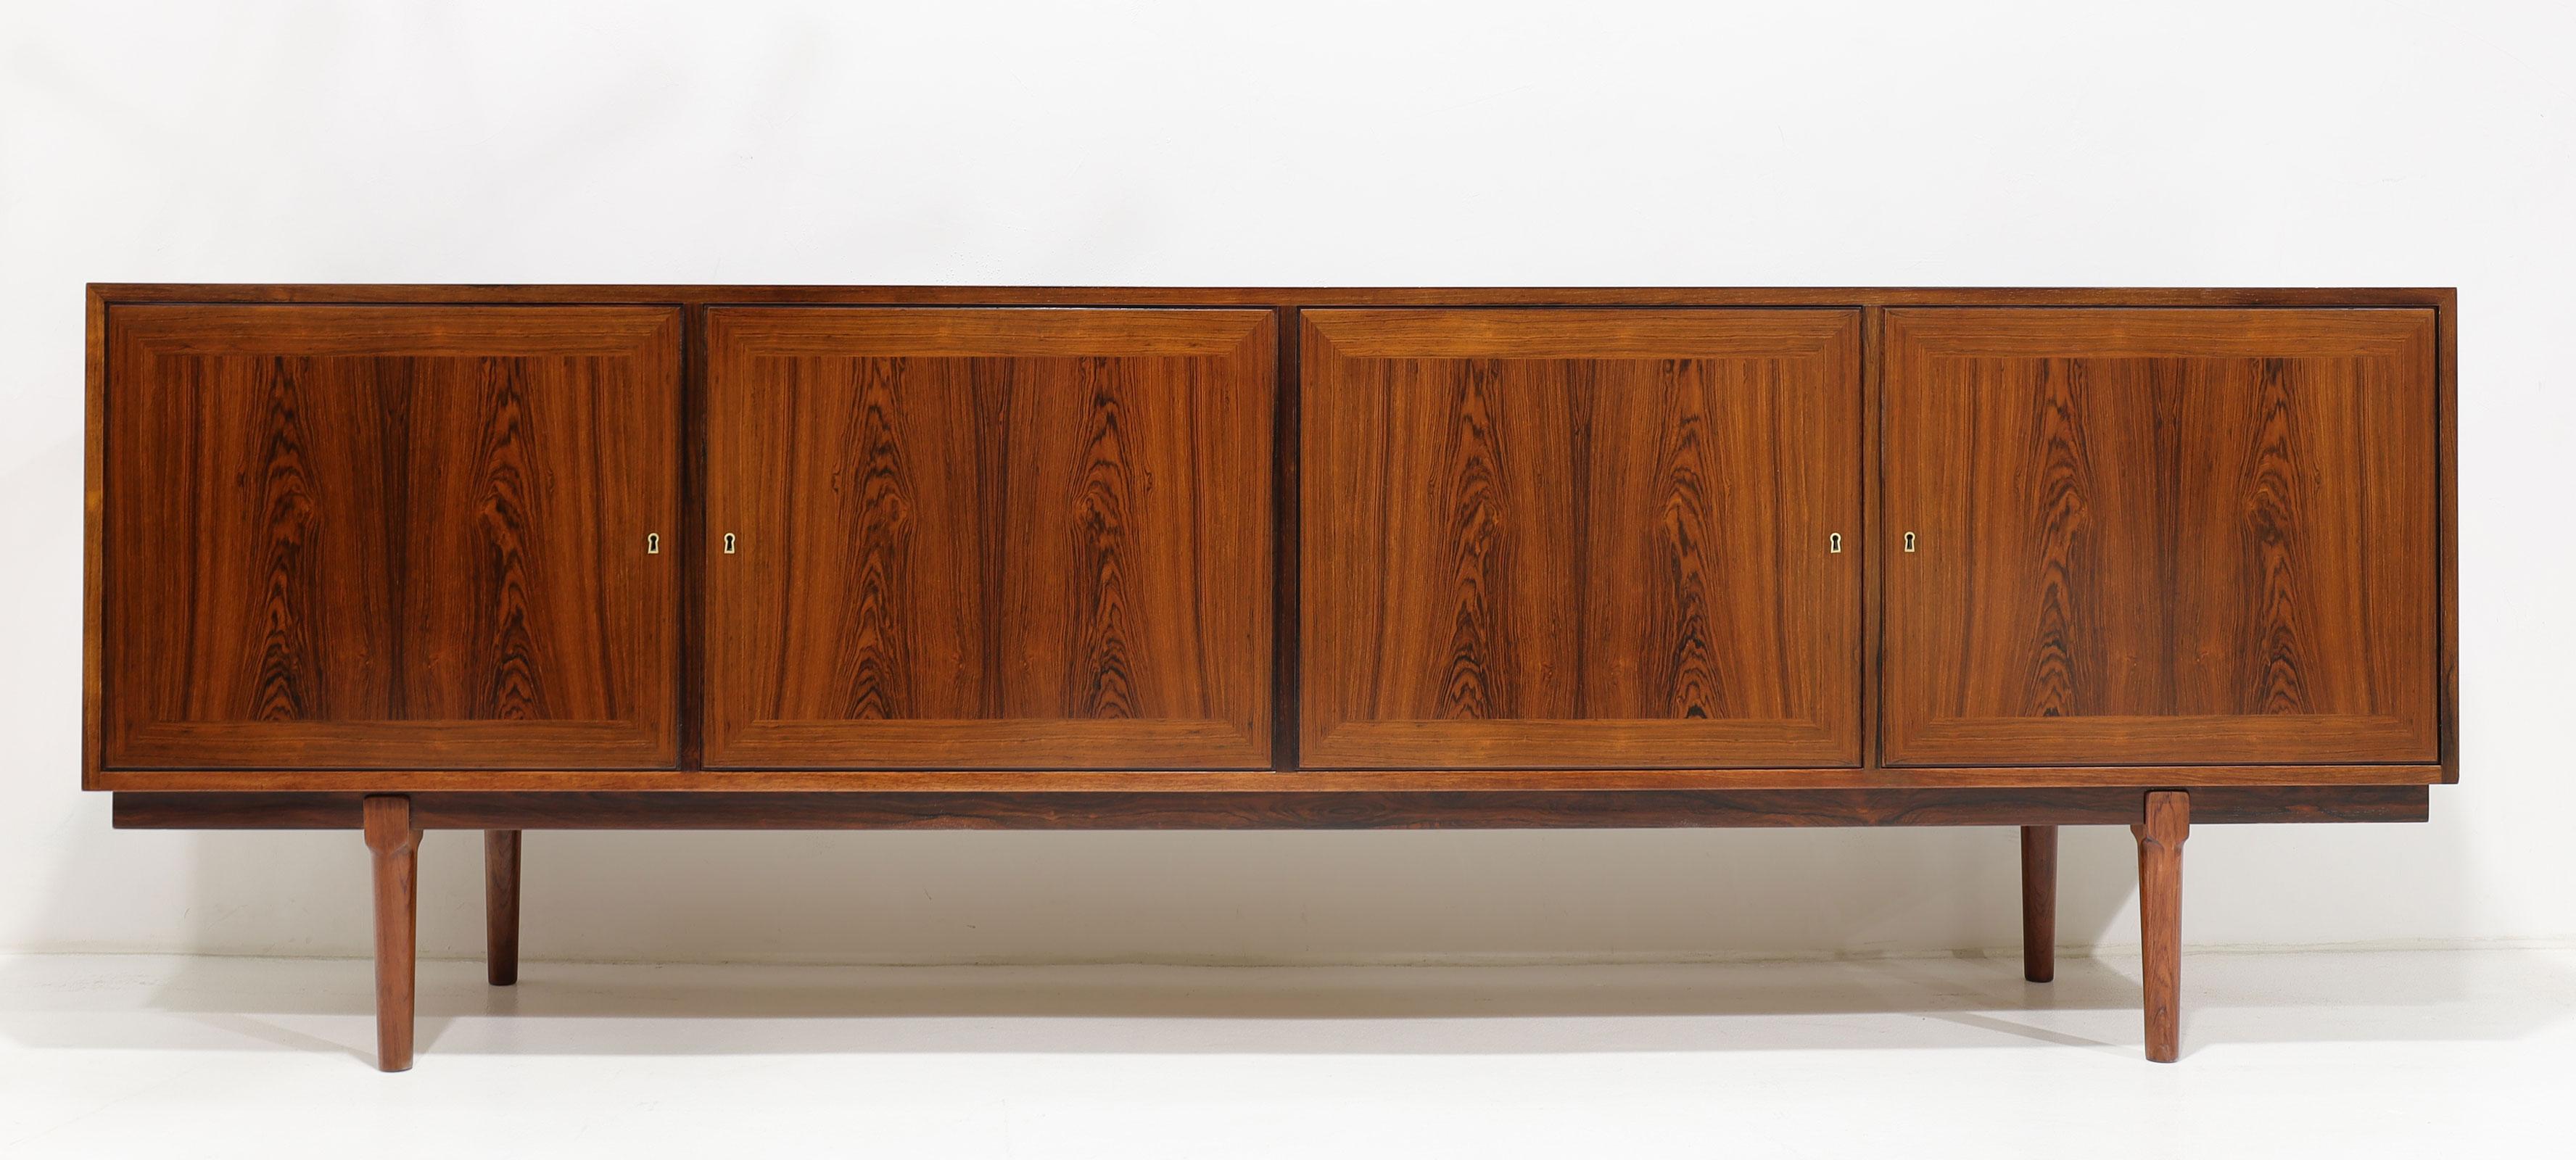 This is a beautiful sideboard with four doors in front with book matched rosewood and a framed surround on each door. We have three keys, but keys are interchangeable. They are brass as are the keyholes. Interior features two drawers and four felt